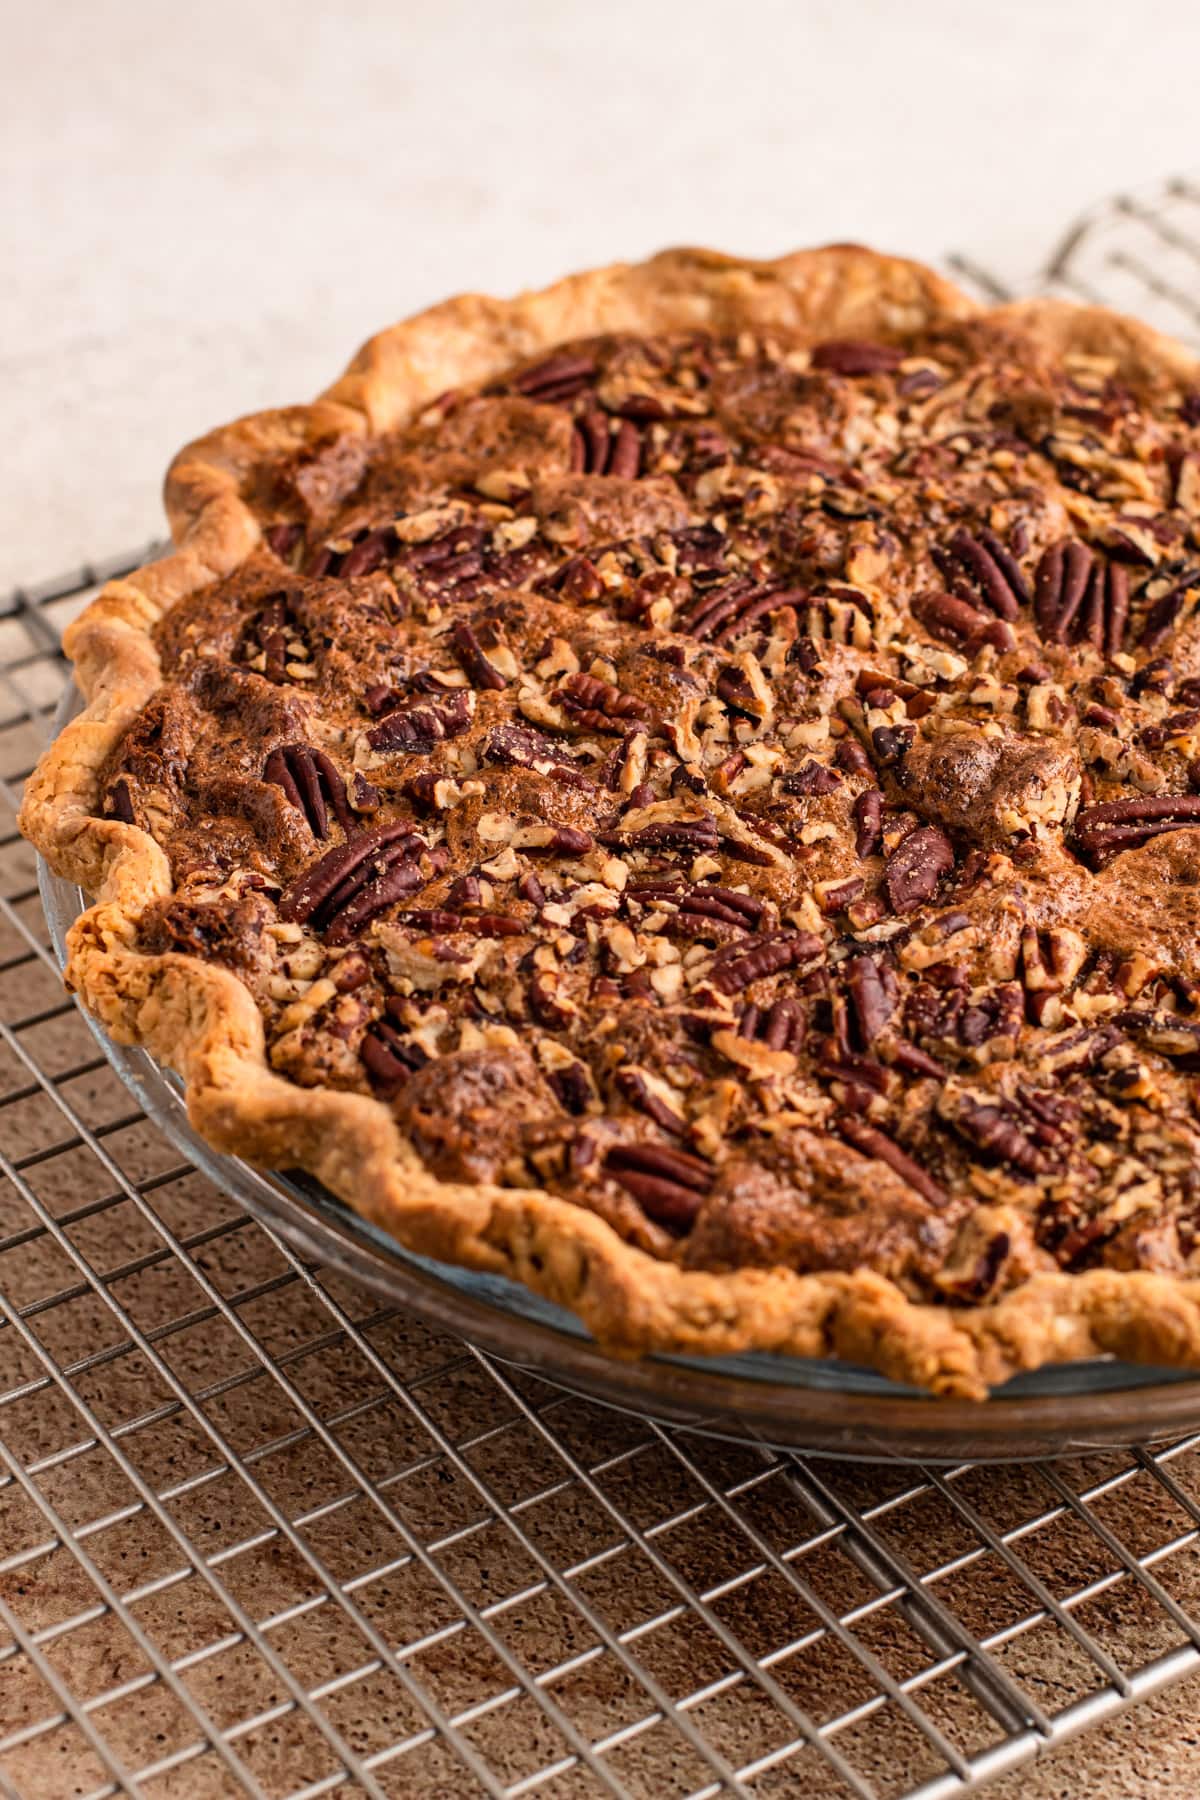 A baked bourbon pecan pie made without corn syrup on a cooling rack.